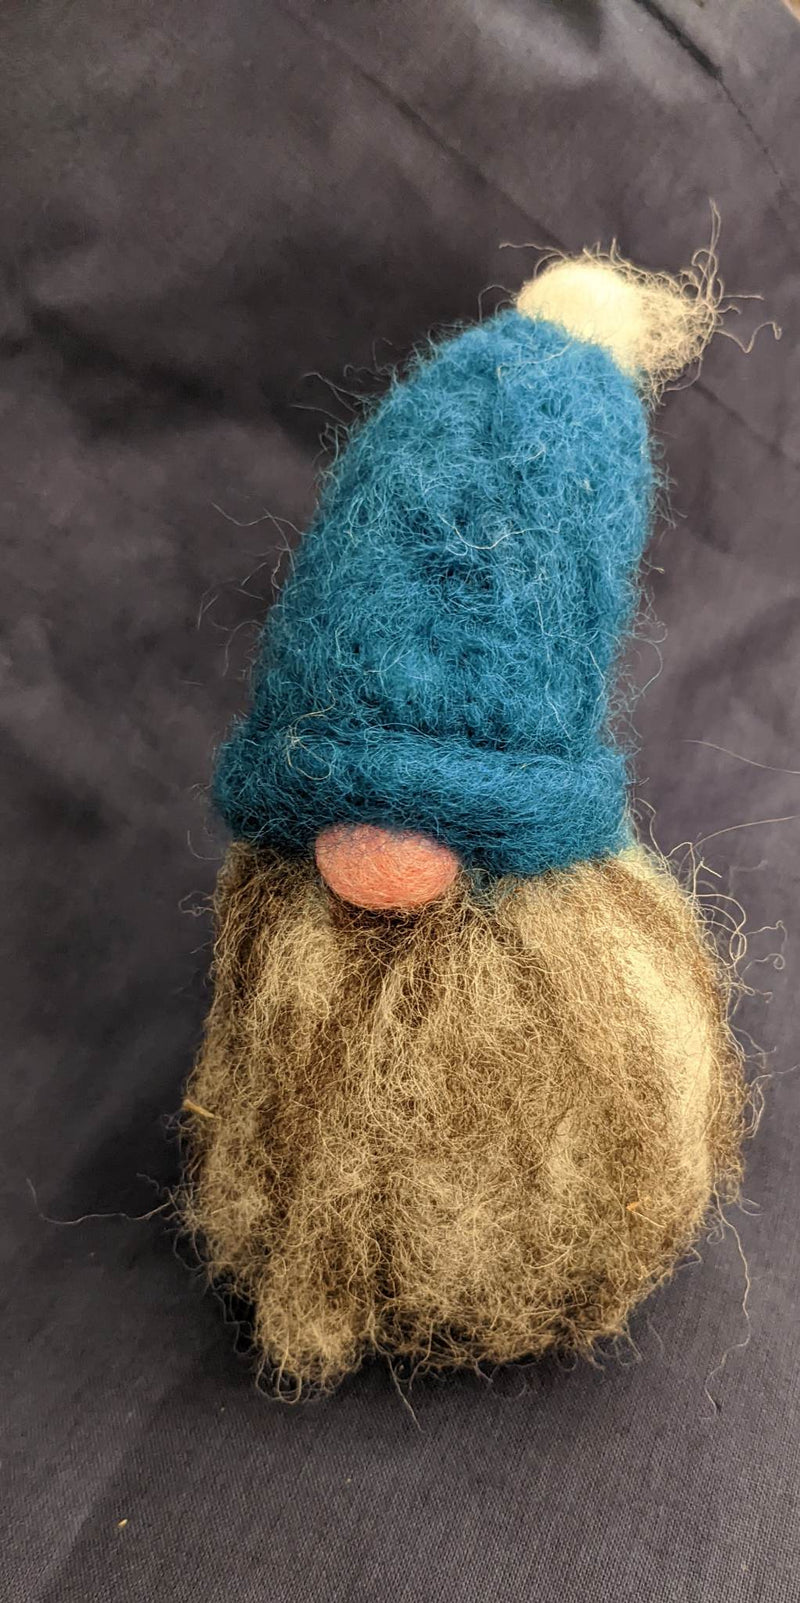 Felted Gnome Workshop - Dec. 10th